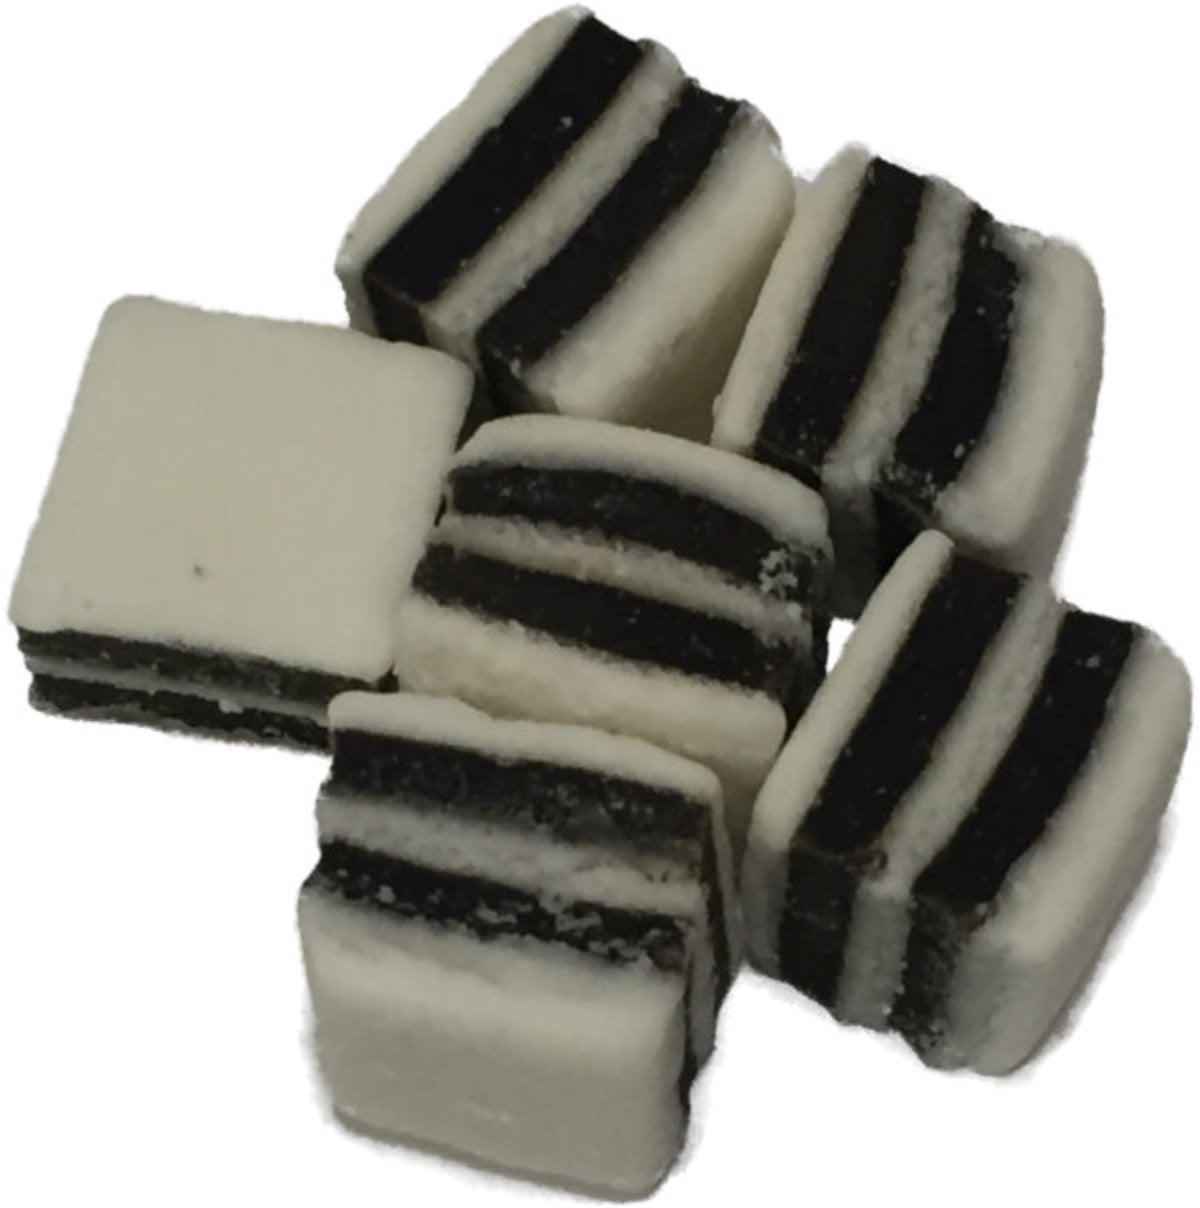 Black and White Mints